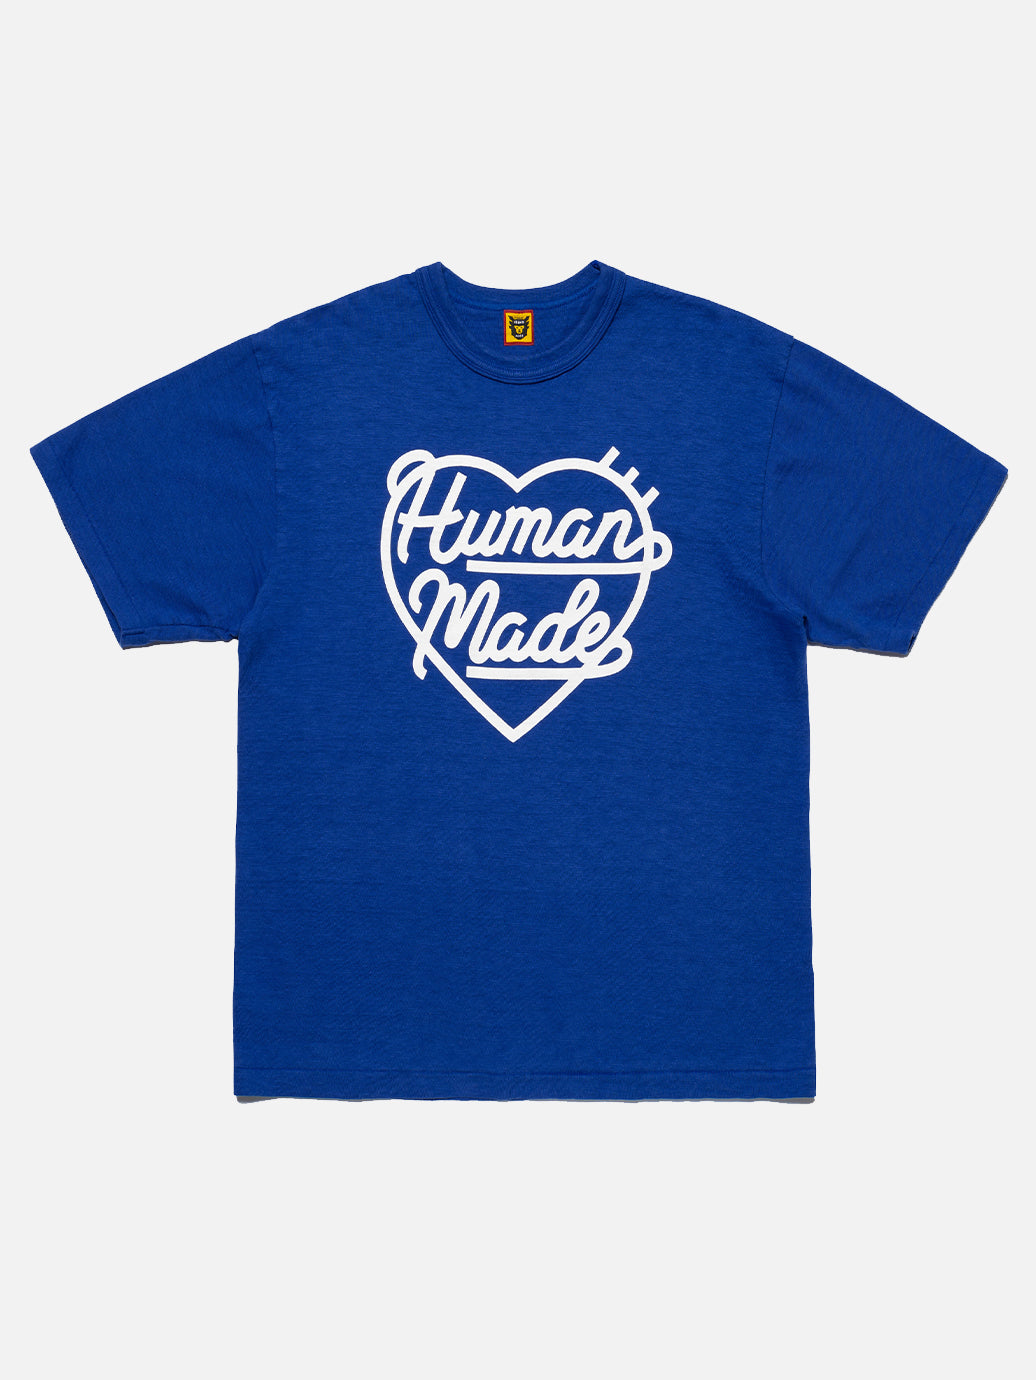 Human Made Color T-Shirt #2 – OALLERY